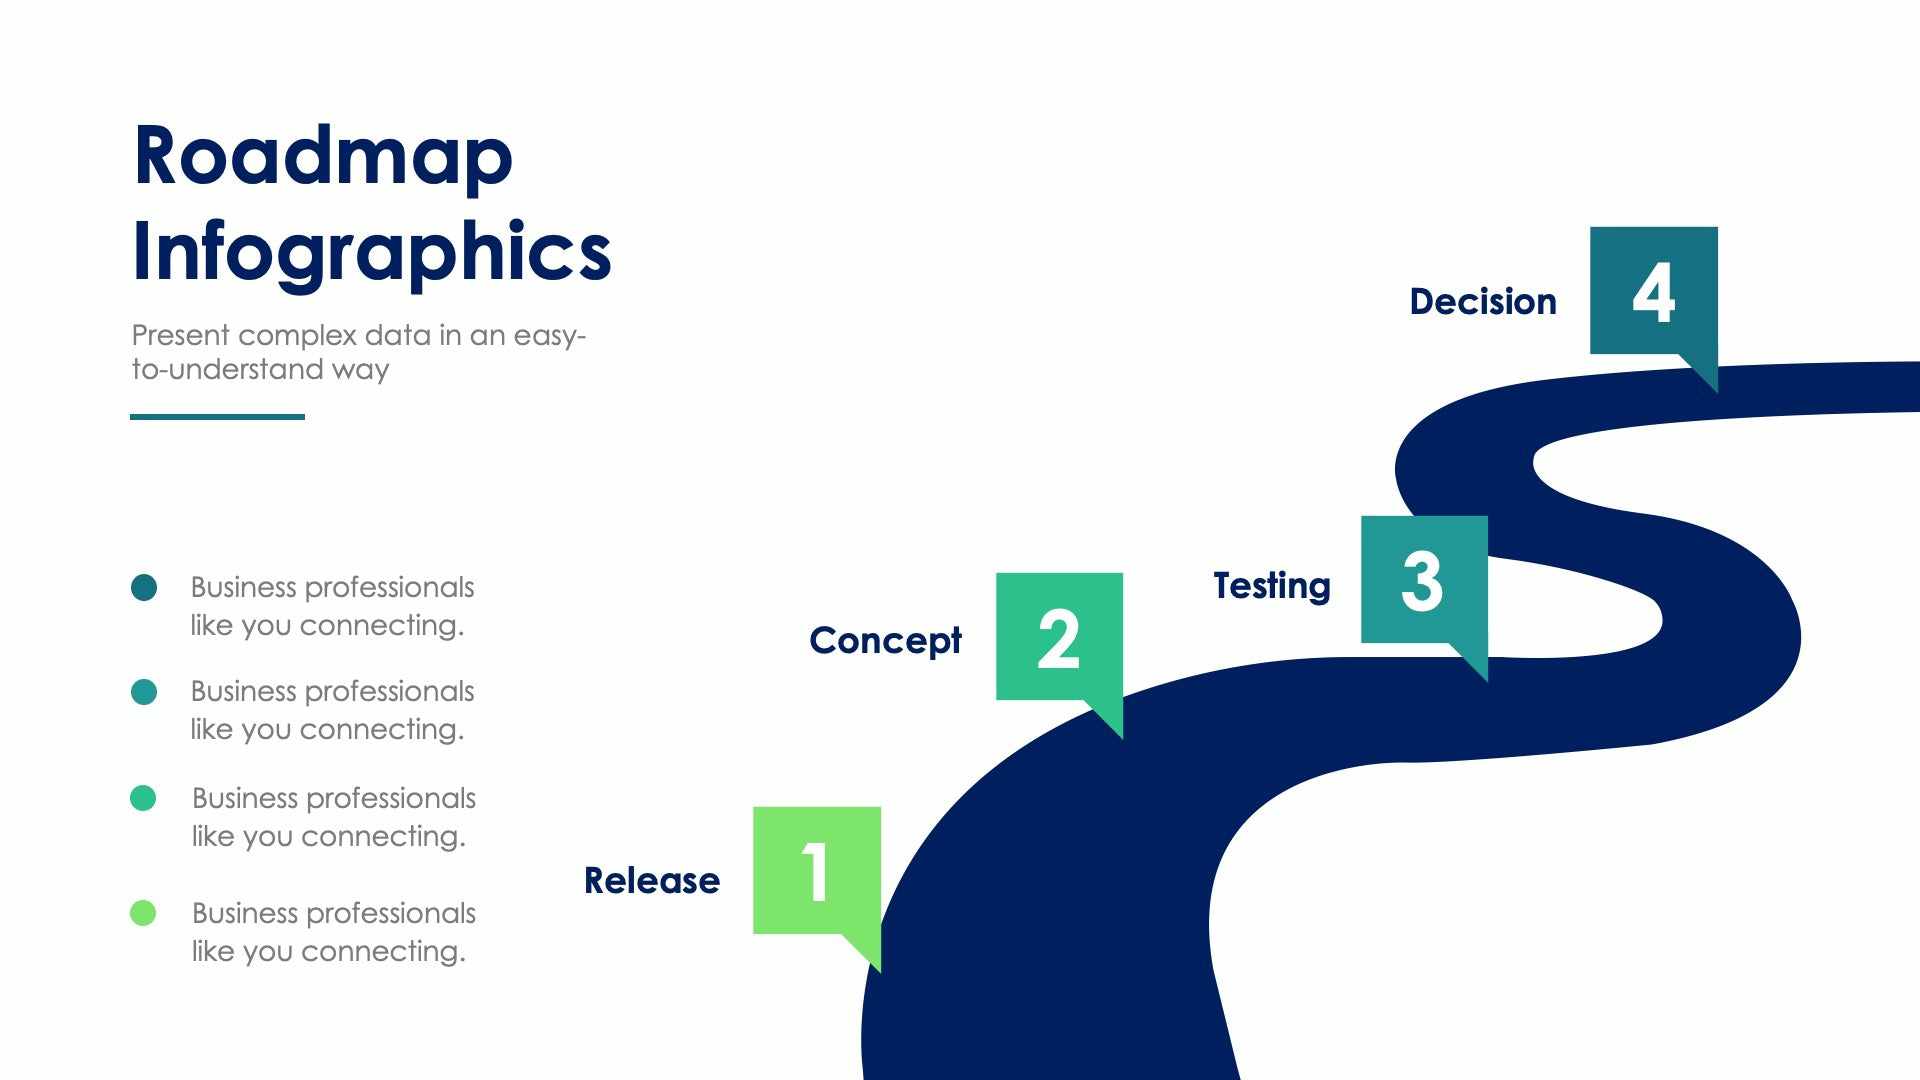 infographic template roadmap